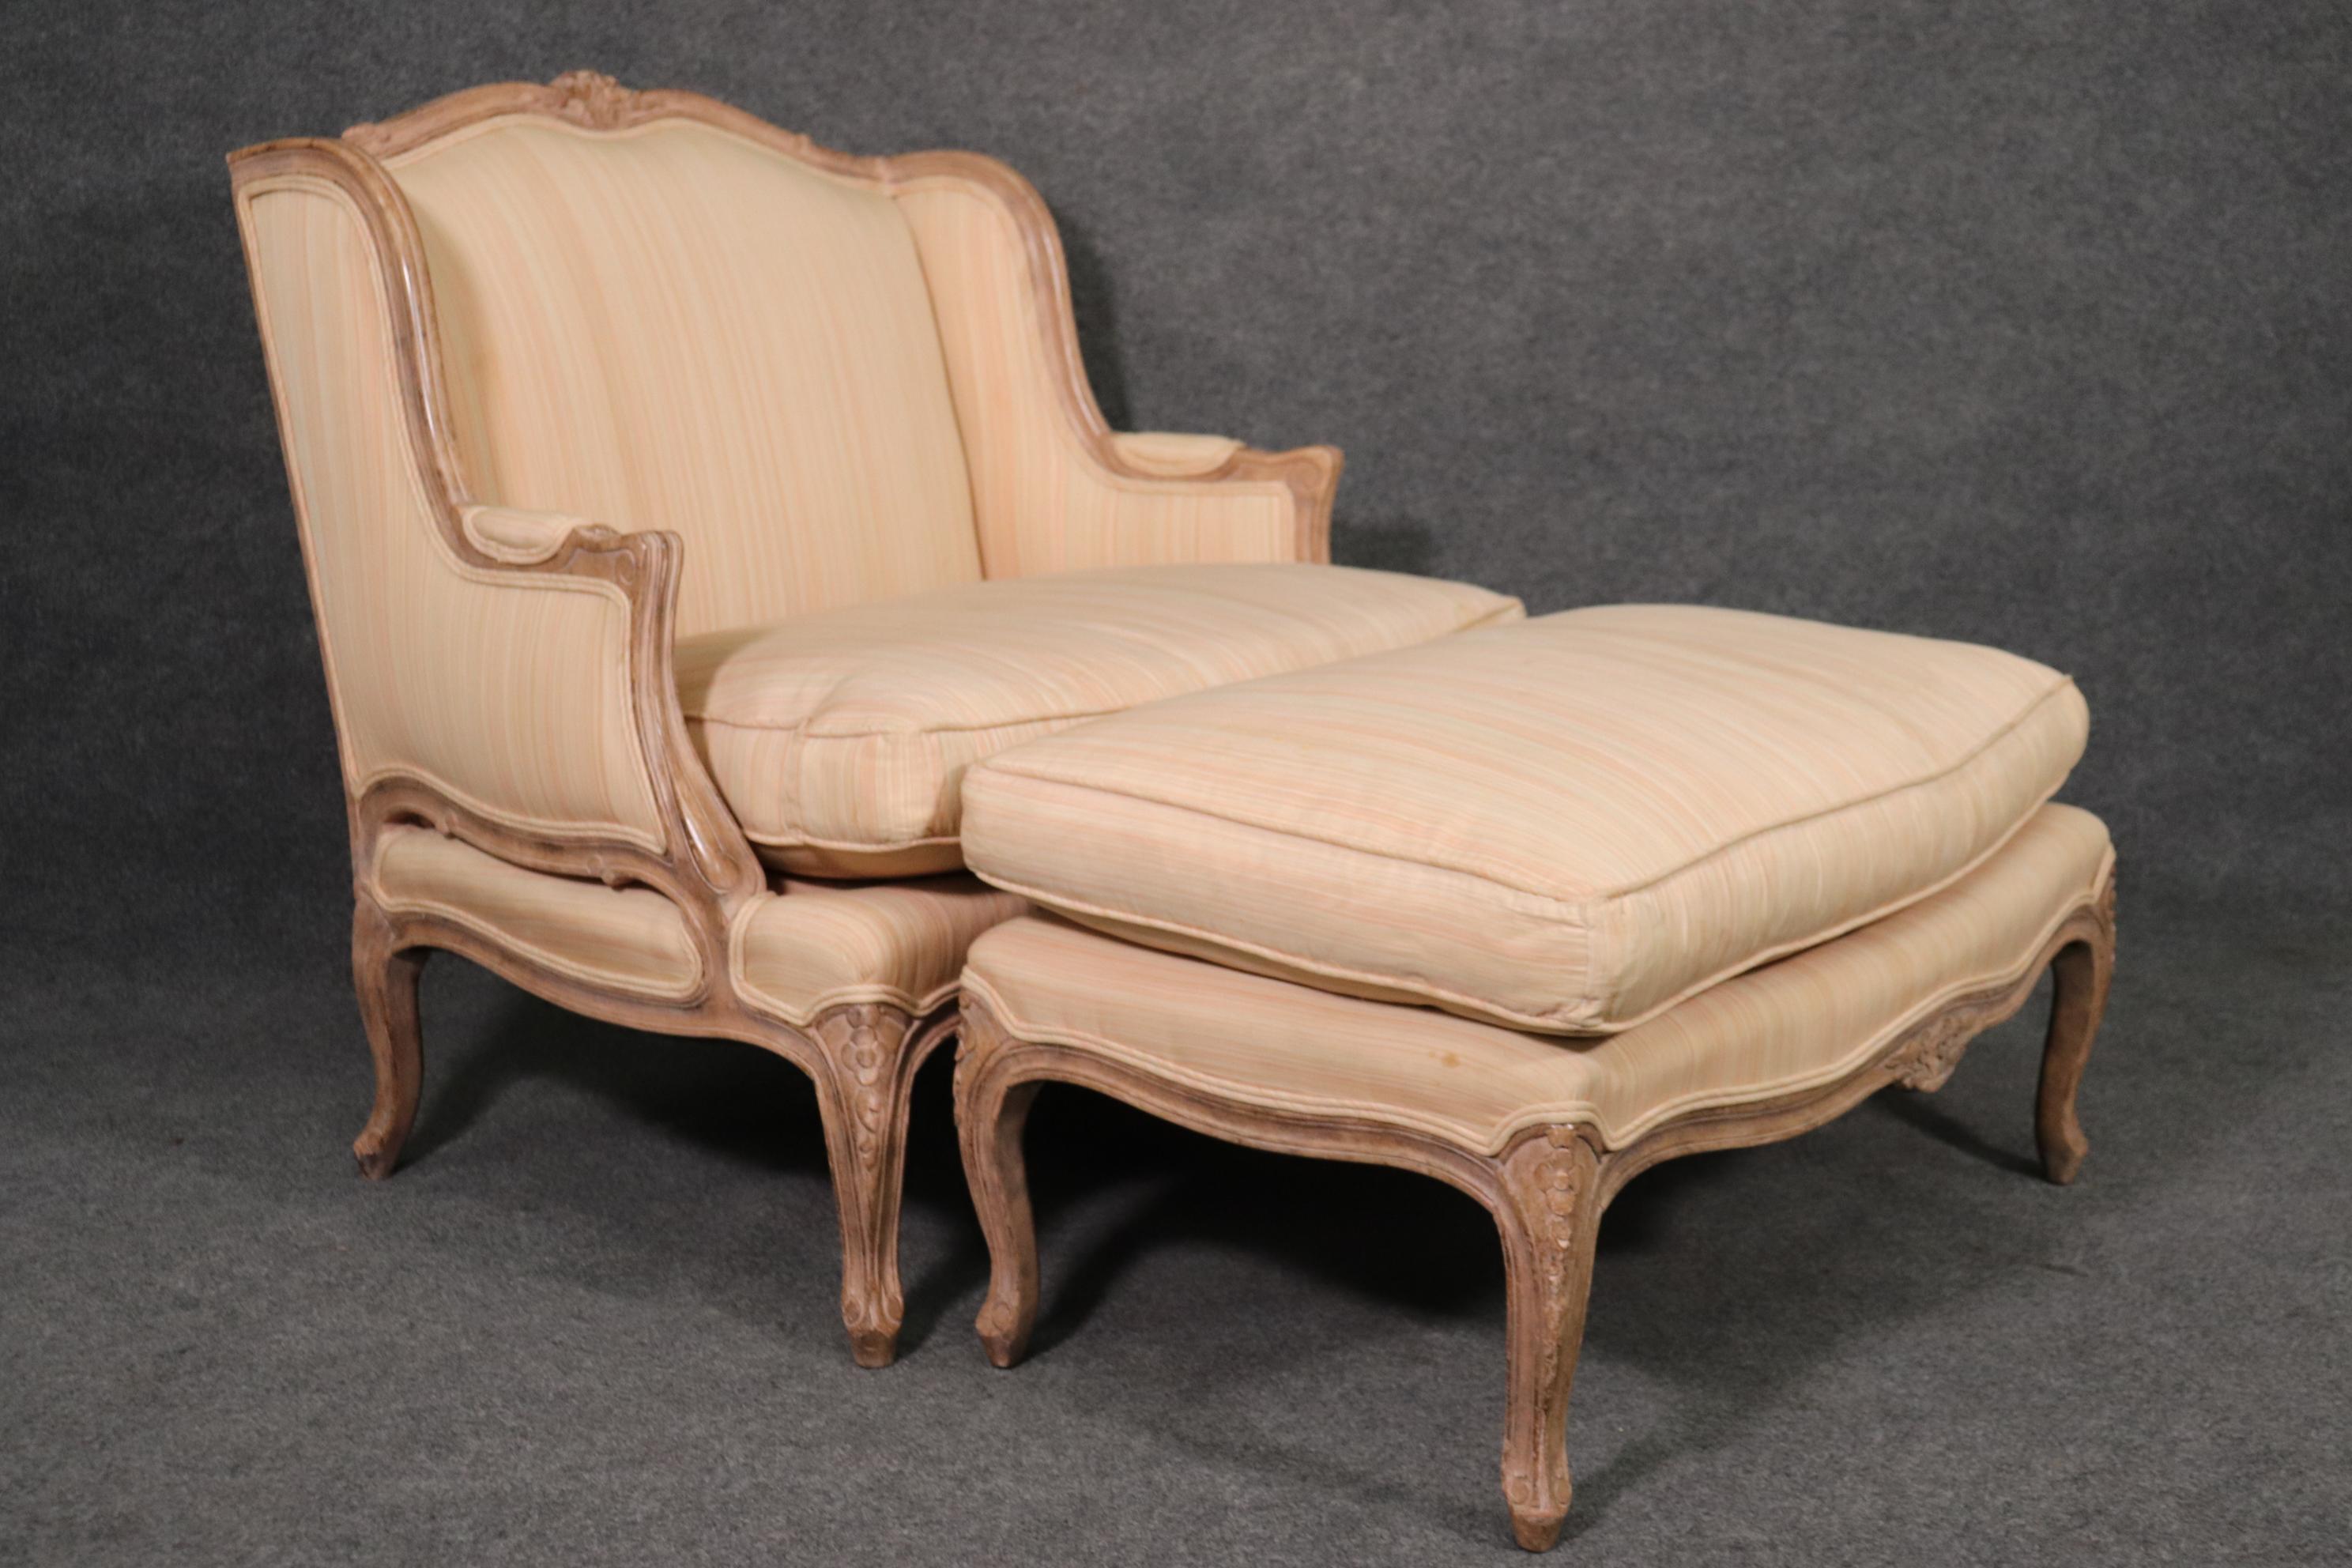 This is a fantastic two piece set of John Stuart American-made bergere with matching ottoman. The frame is gorgeous with a glazed painted finish from the factory. The frame is distressed to look antique. The upholstery is used and will show stains